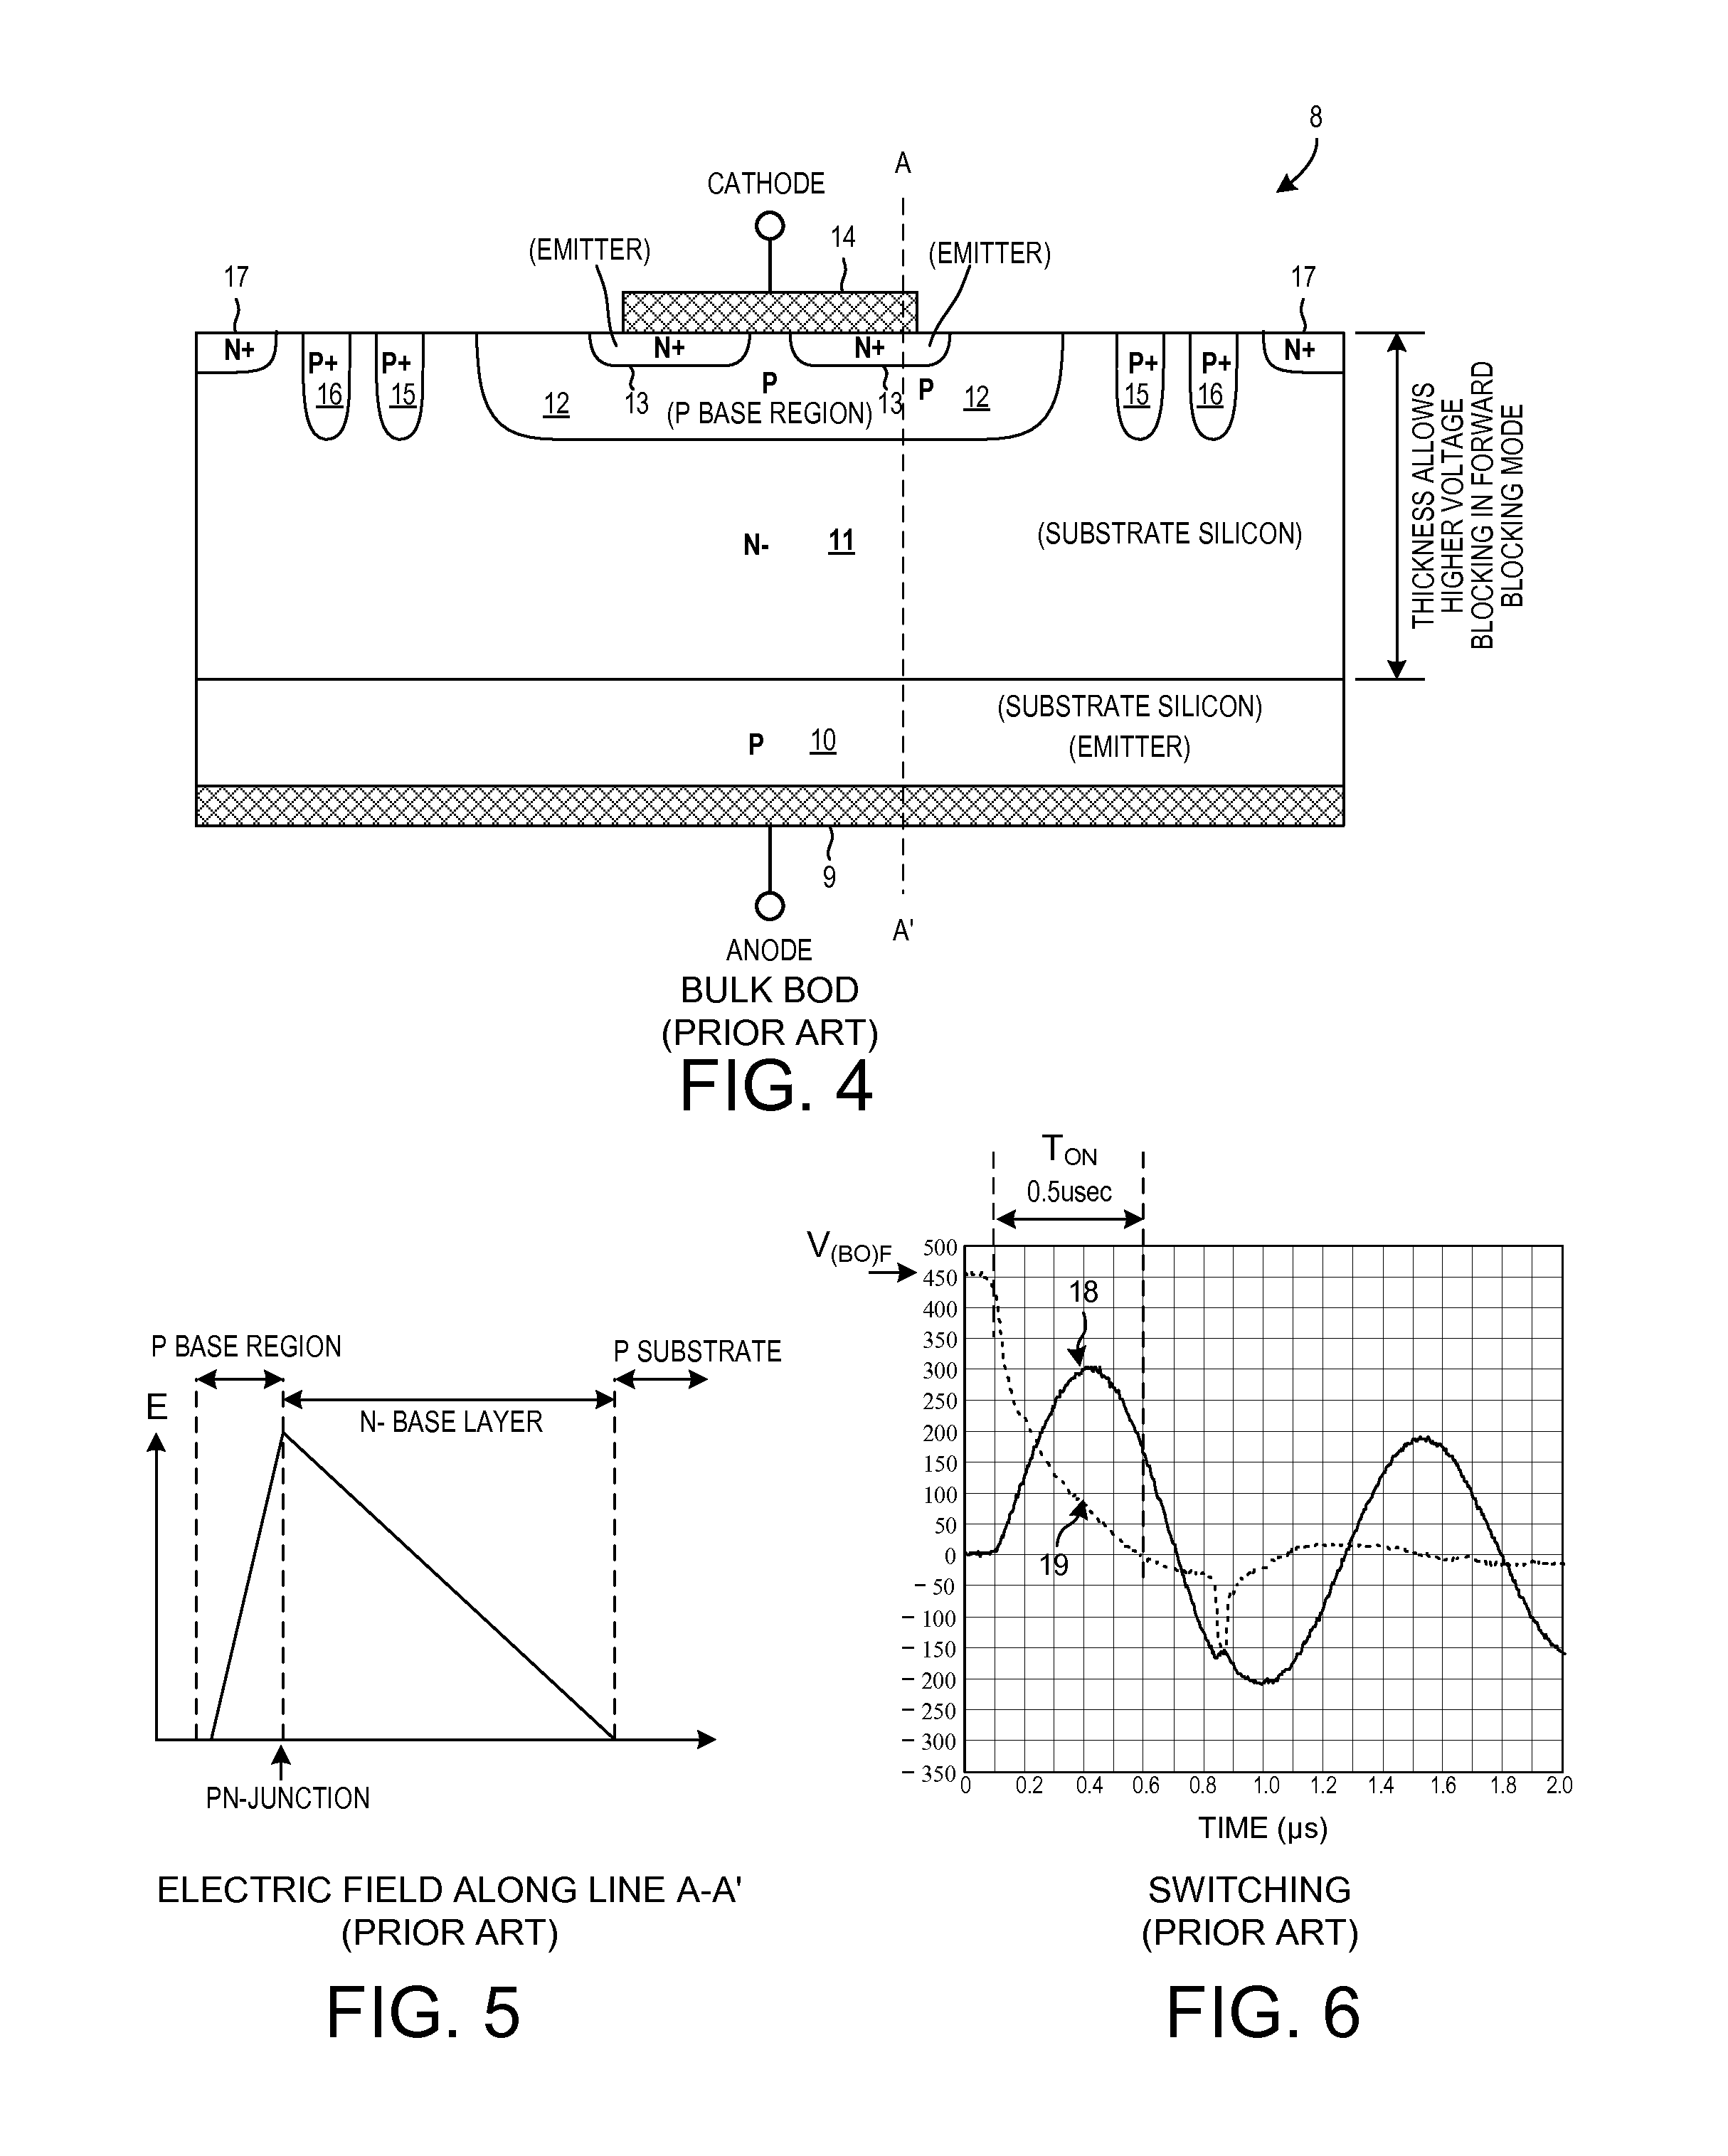 Packaged overvoltage protection circuit for triggering thyristors